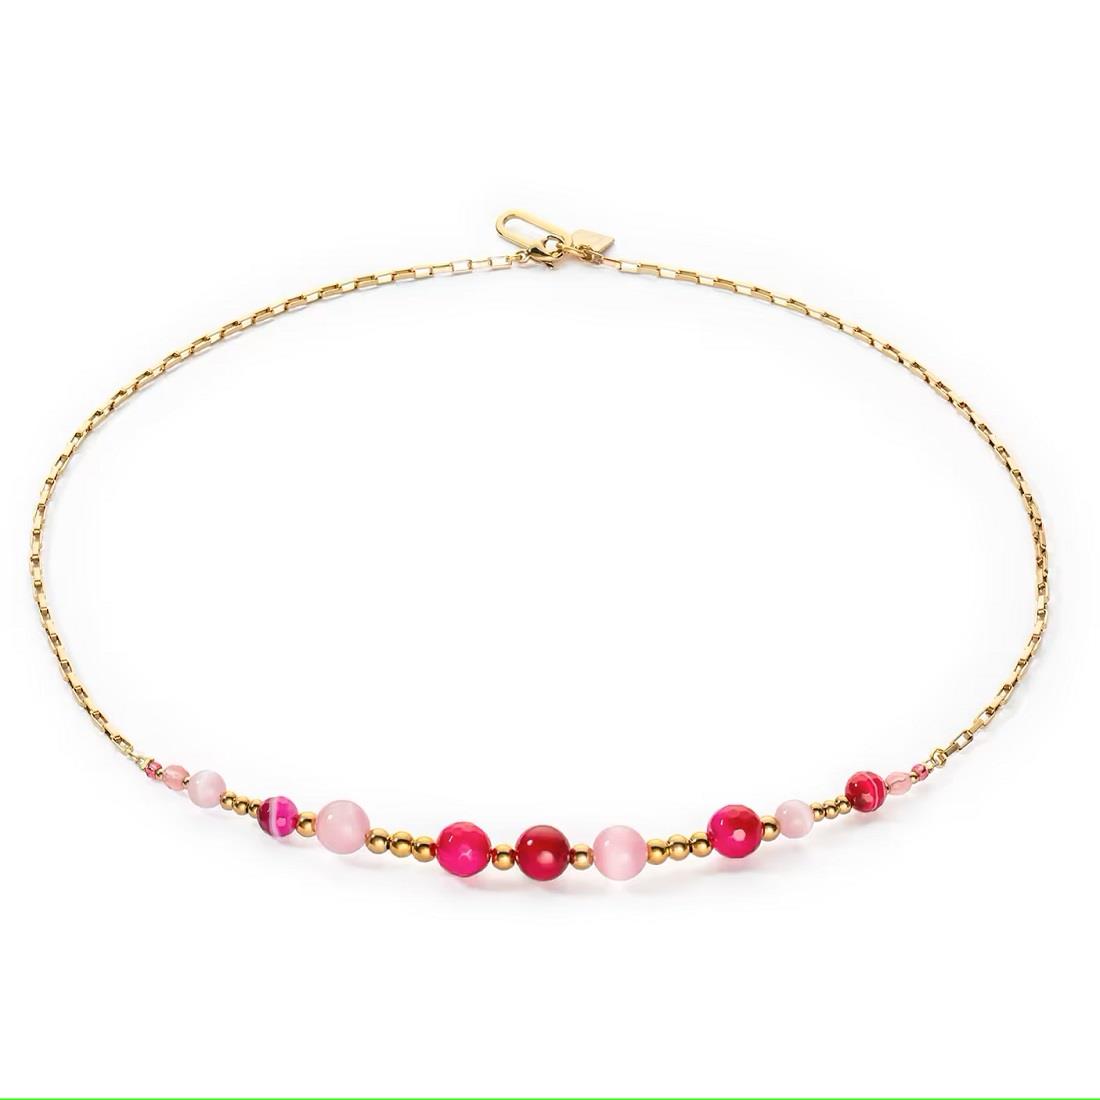 Candy necklace with pink spheres - COEUR DE LION